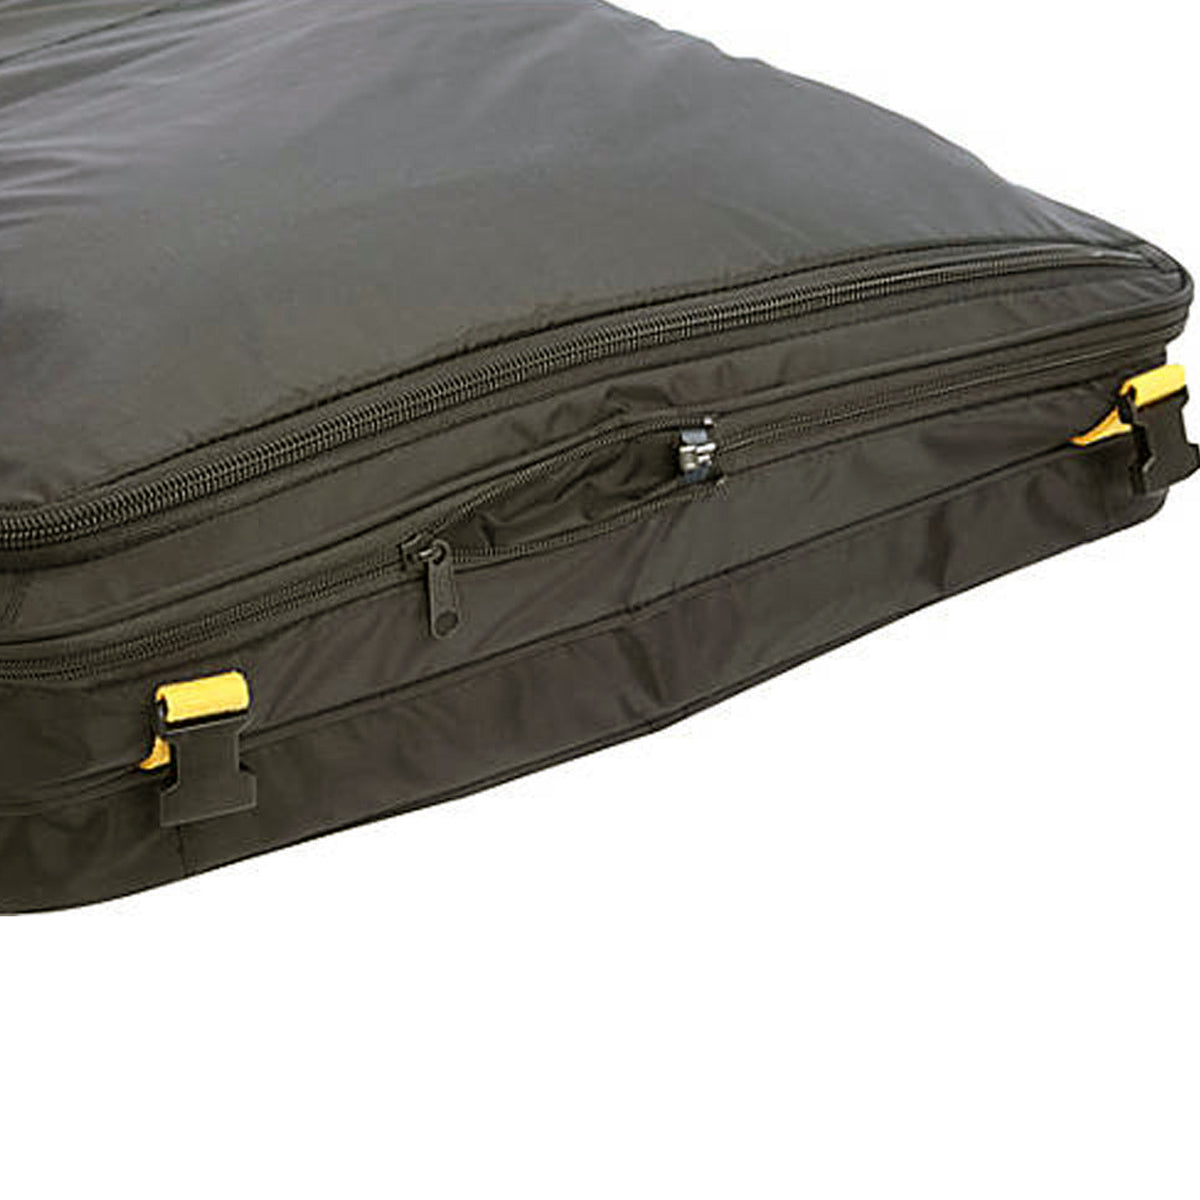 A.Saks Deluxe Expandable Tri Fold Carry On Garment Bag